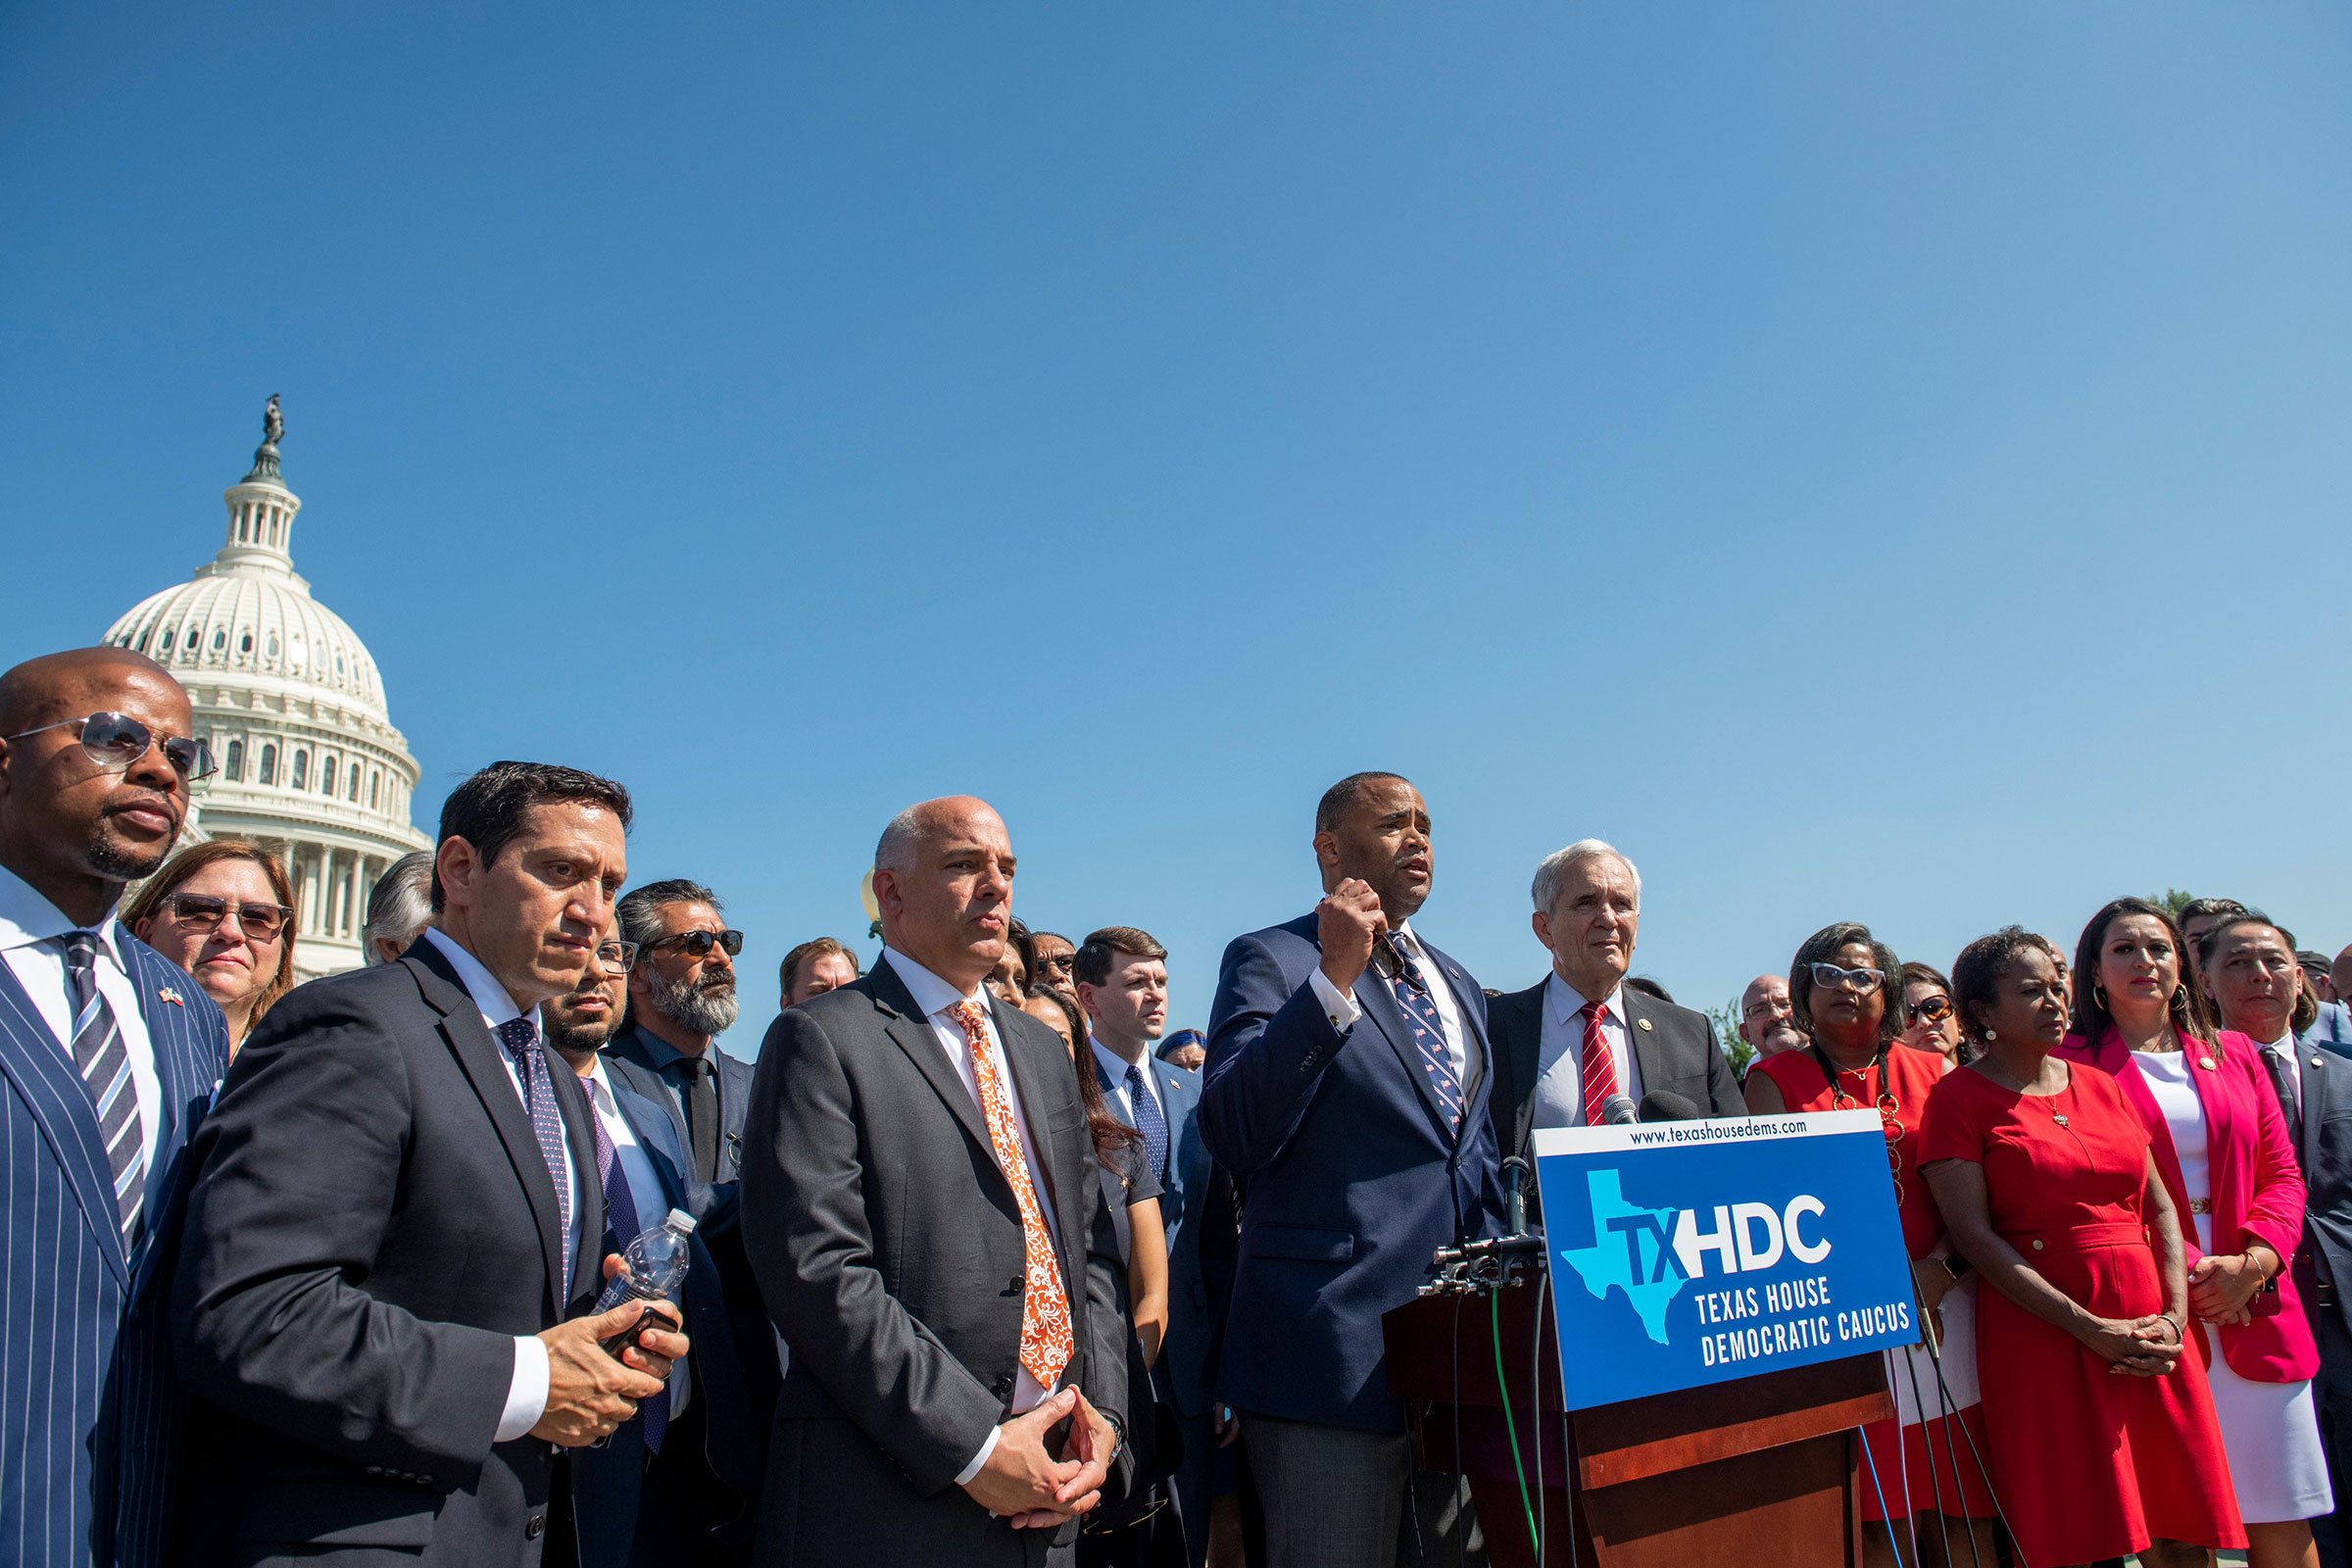 Congressmen Rep. Marc Veasey speaks alongside Texas state House Democrats during a news conference on voting rights outside the Capitol in Washington on July 13, 2021. (Shutterstock)